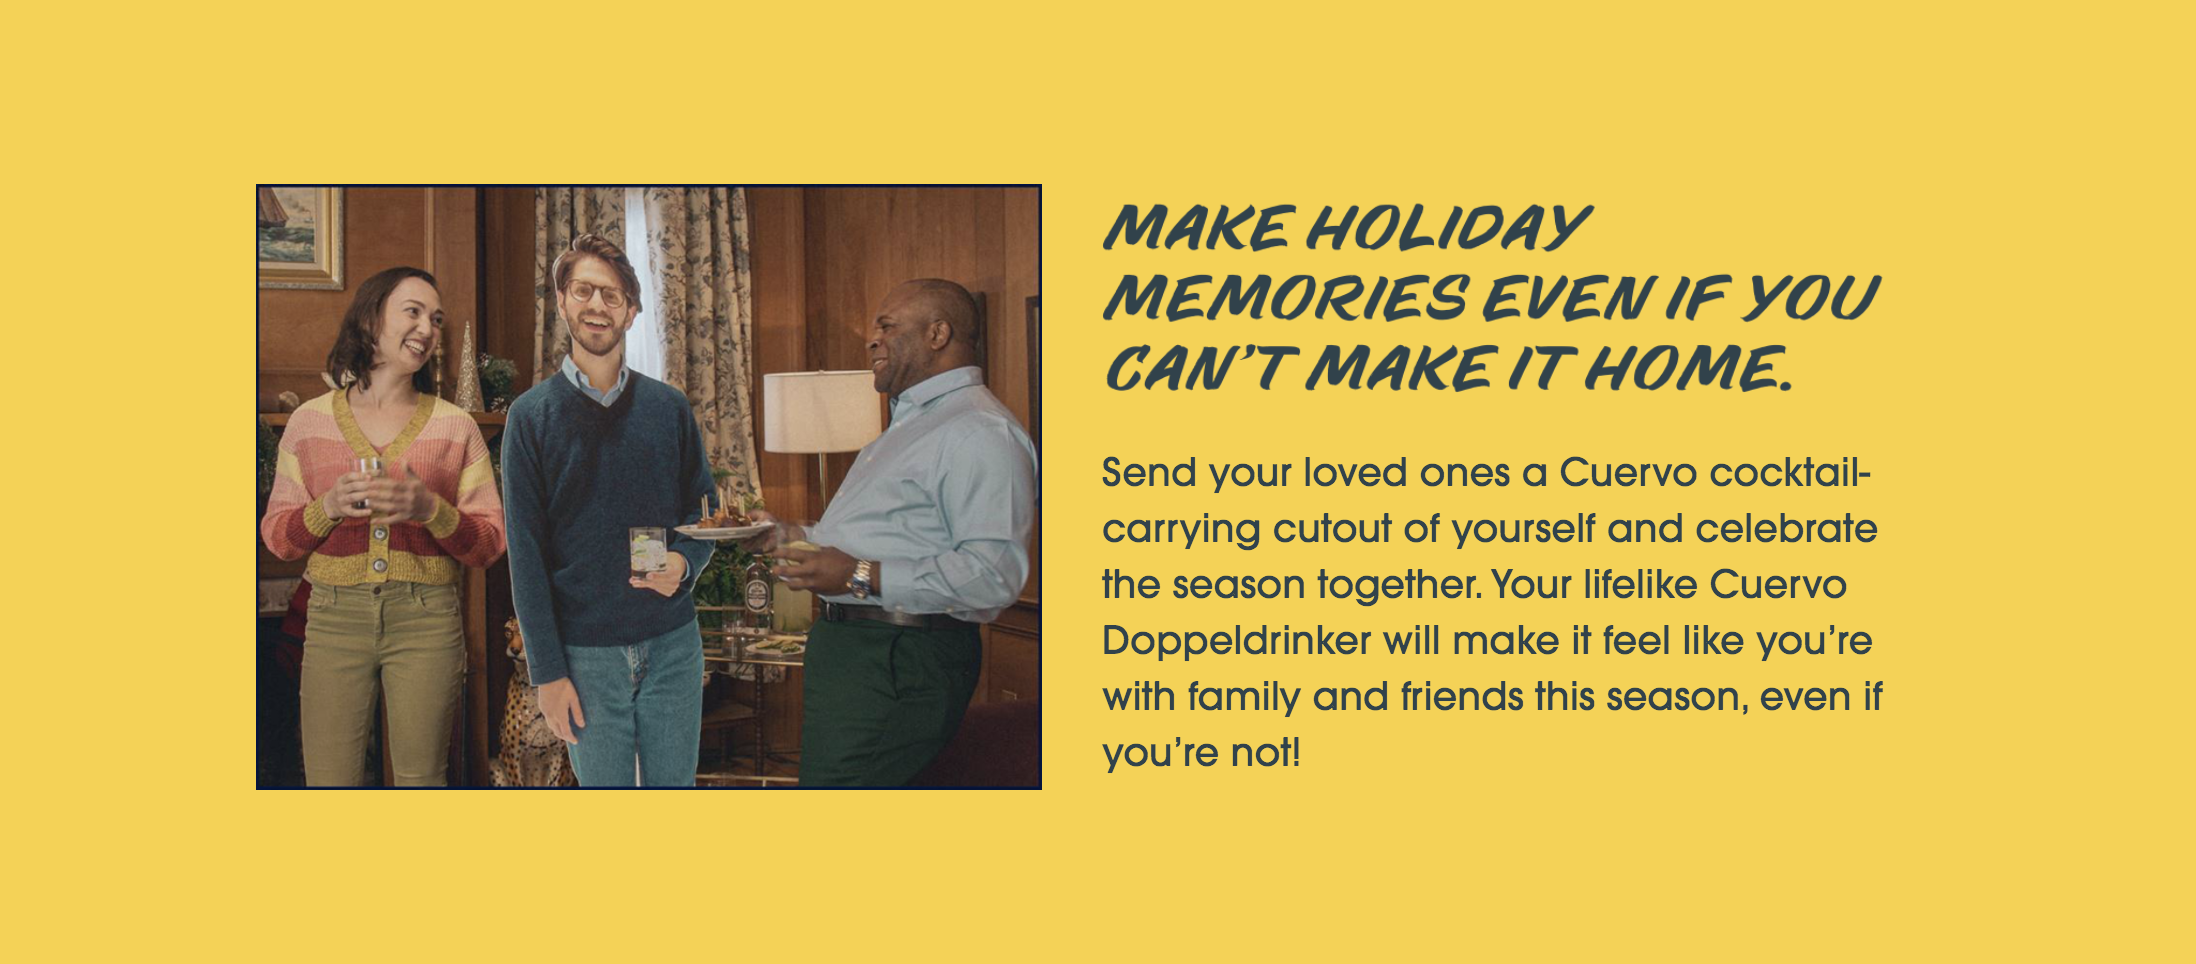 Make holiday memories even if you can't make it home